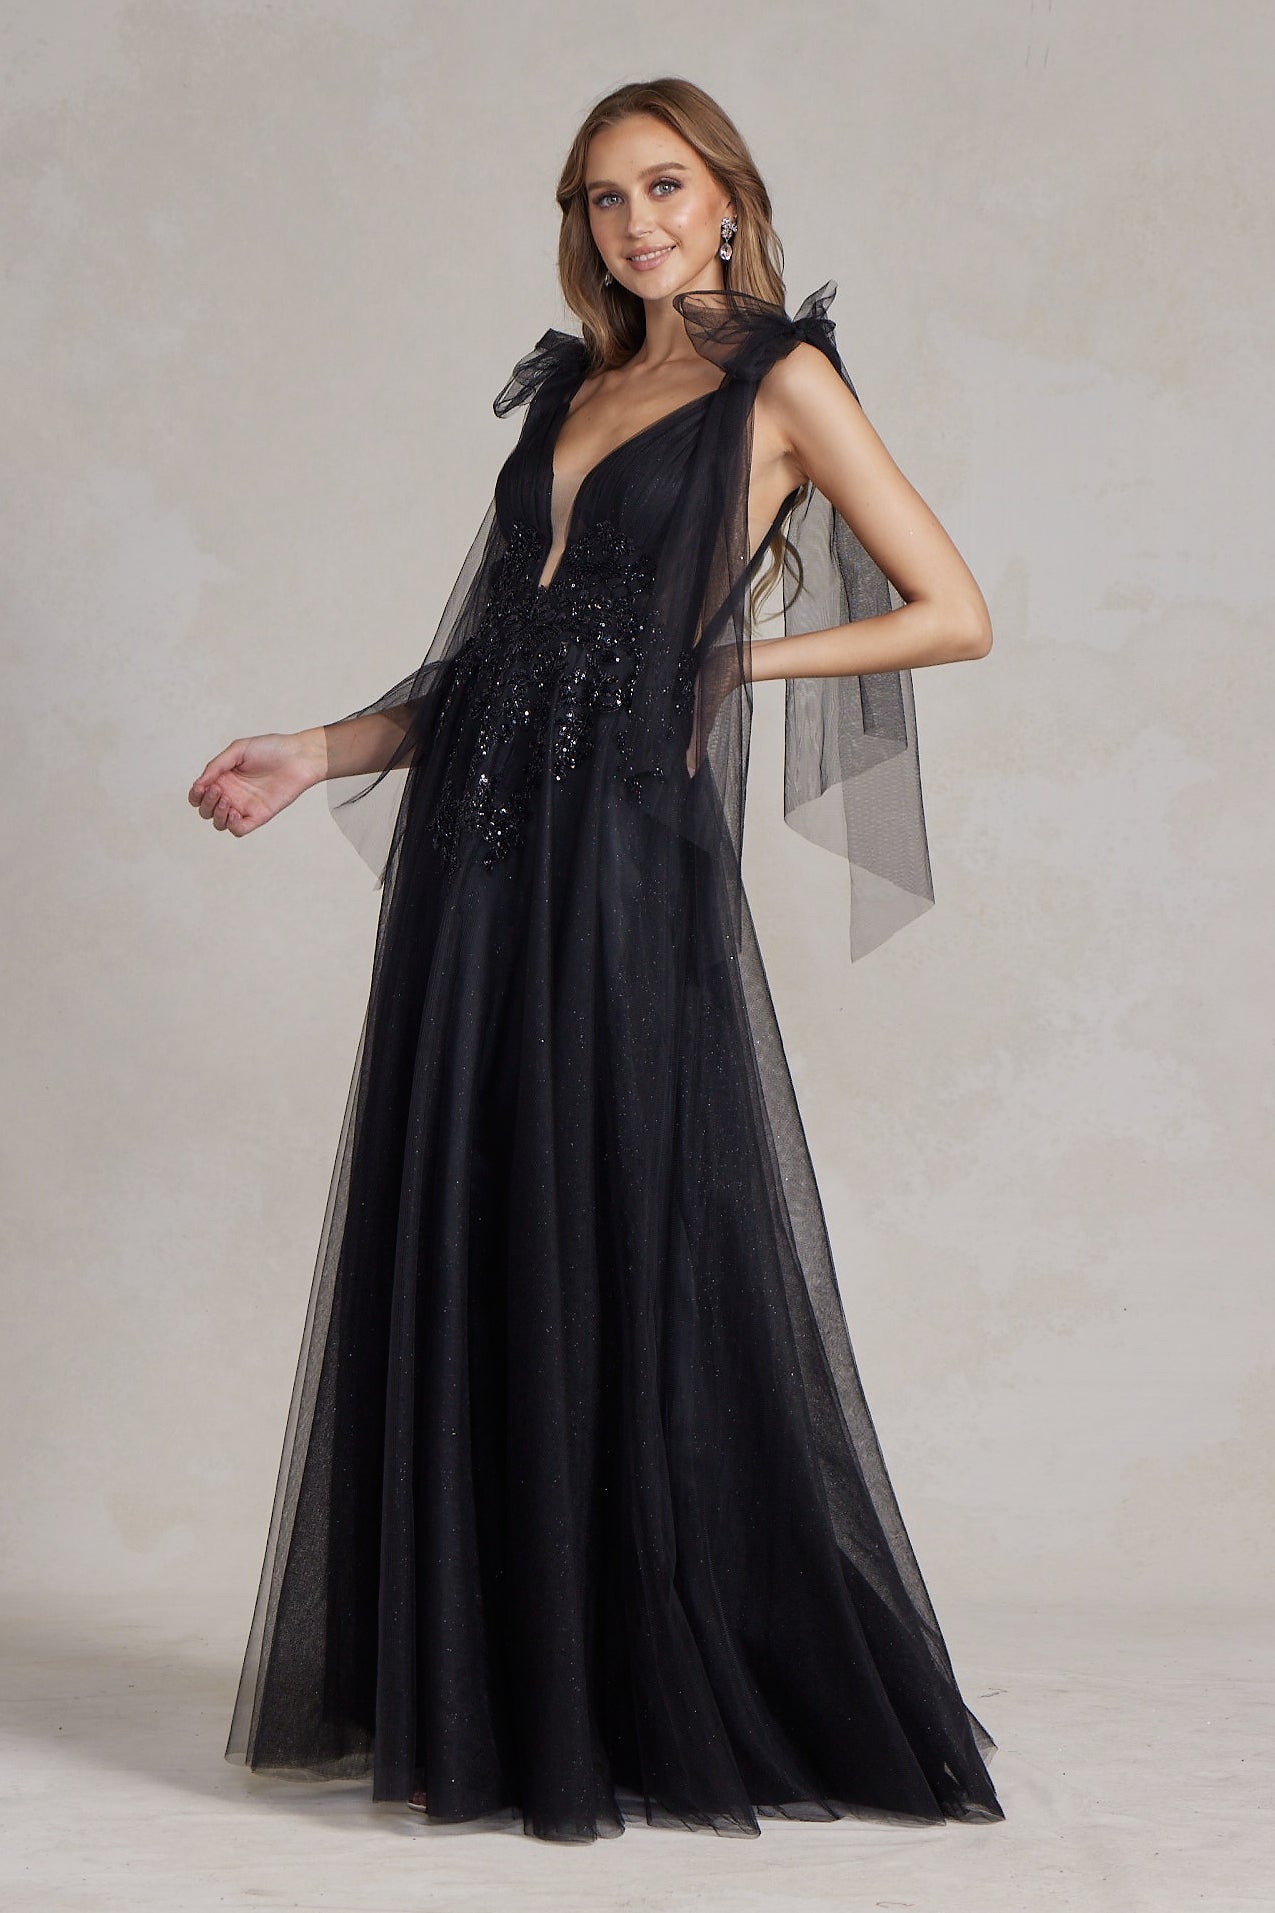 Tulle Skirt Deep Illusion V-Neck Embroidered Lace Long Prom Dress NXE1075-Prom Dress-smcfashion.com